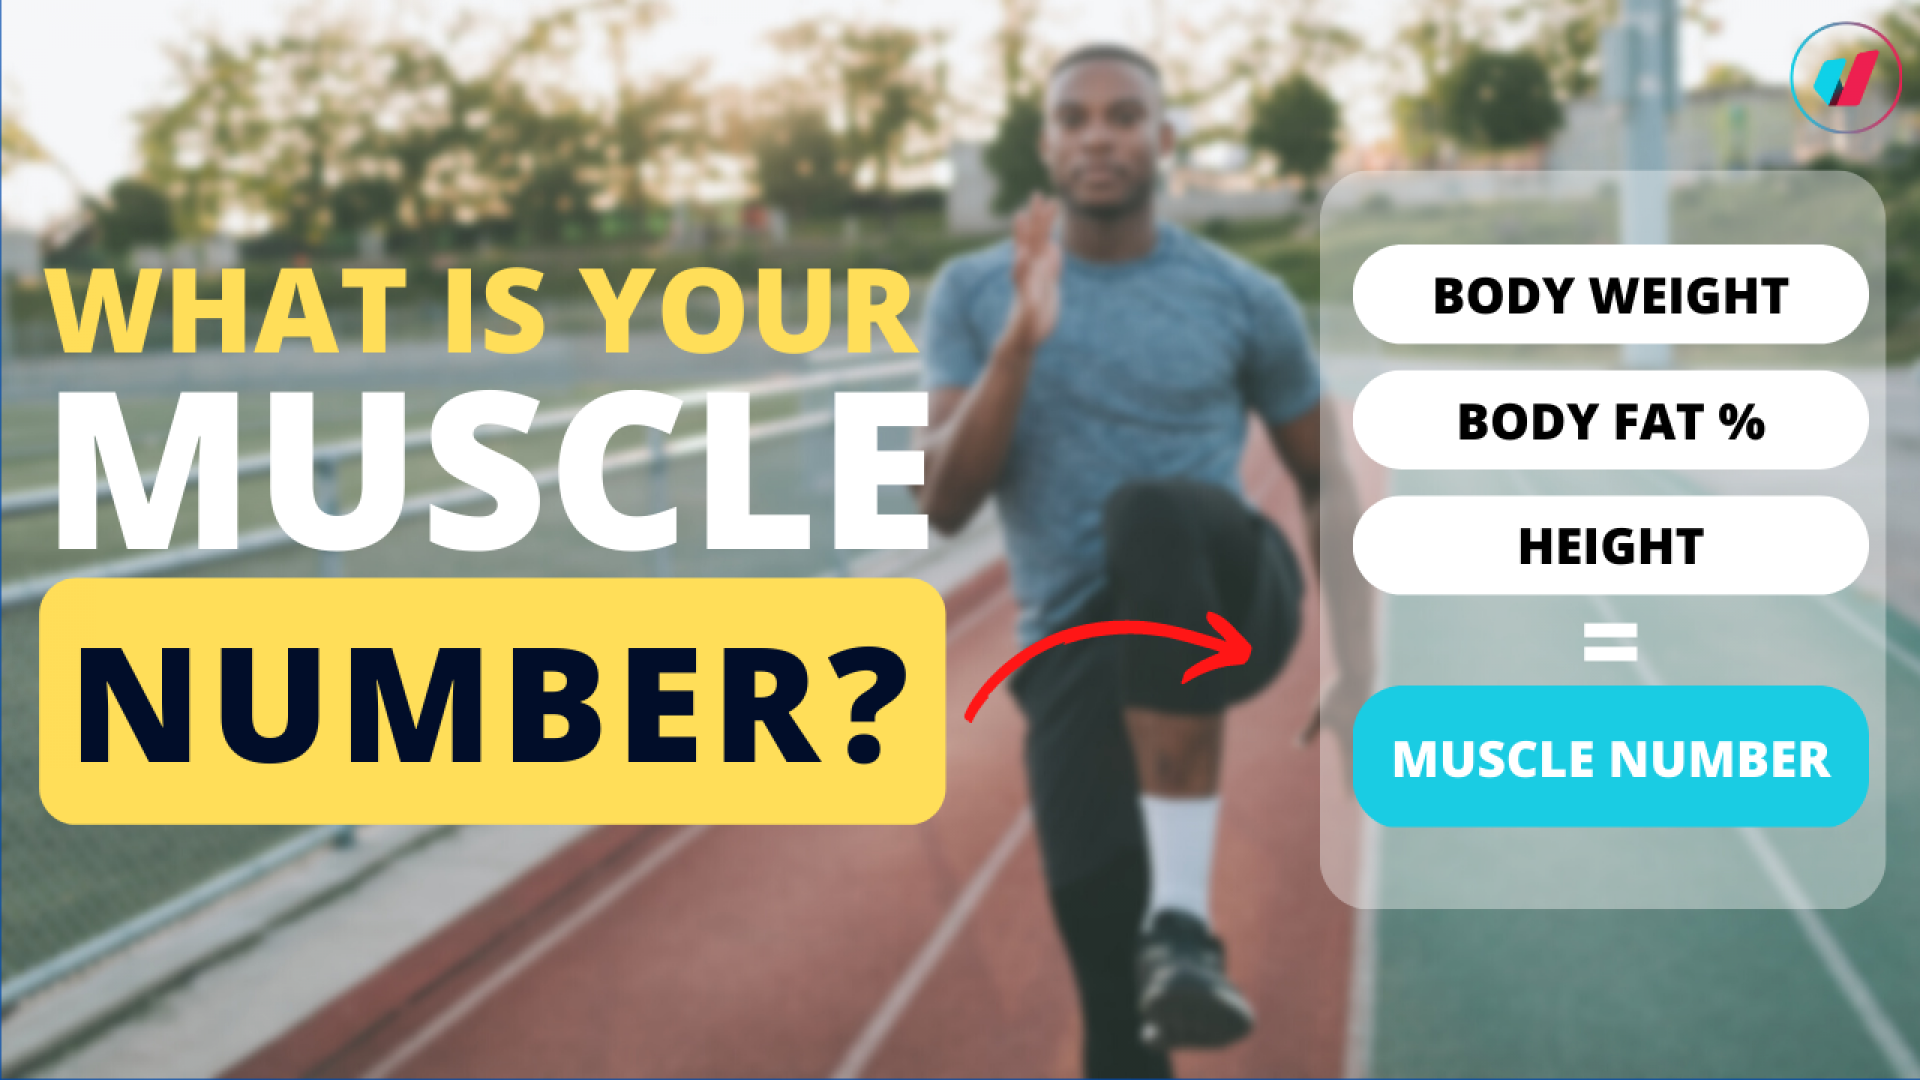 WHAT IS YOUR MUSCLE NUMBER?